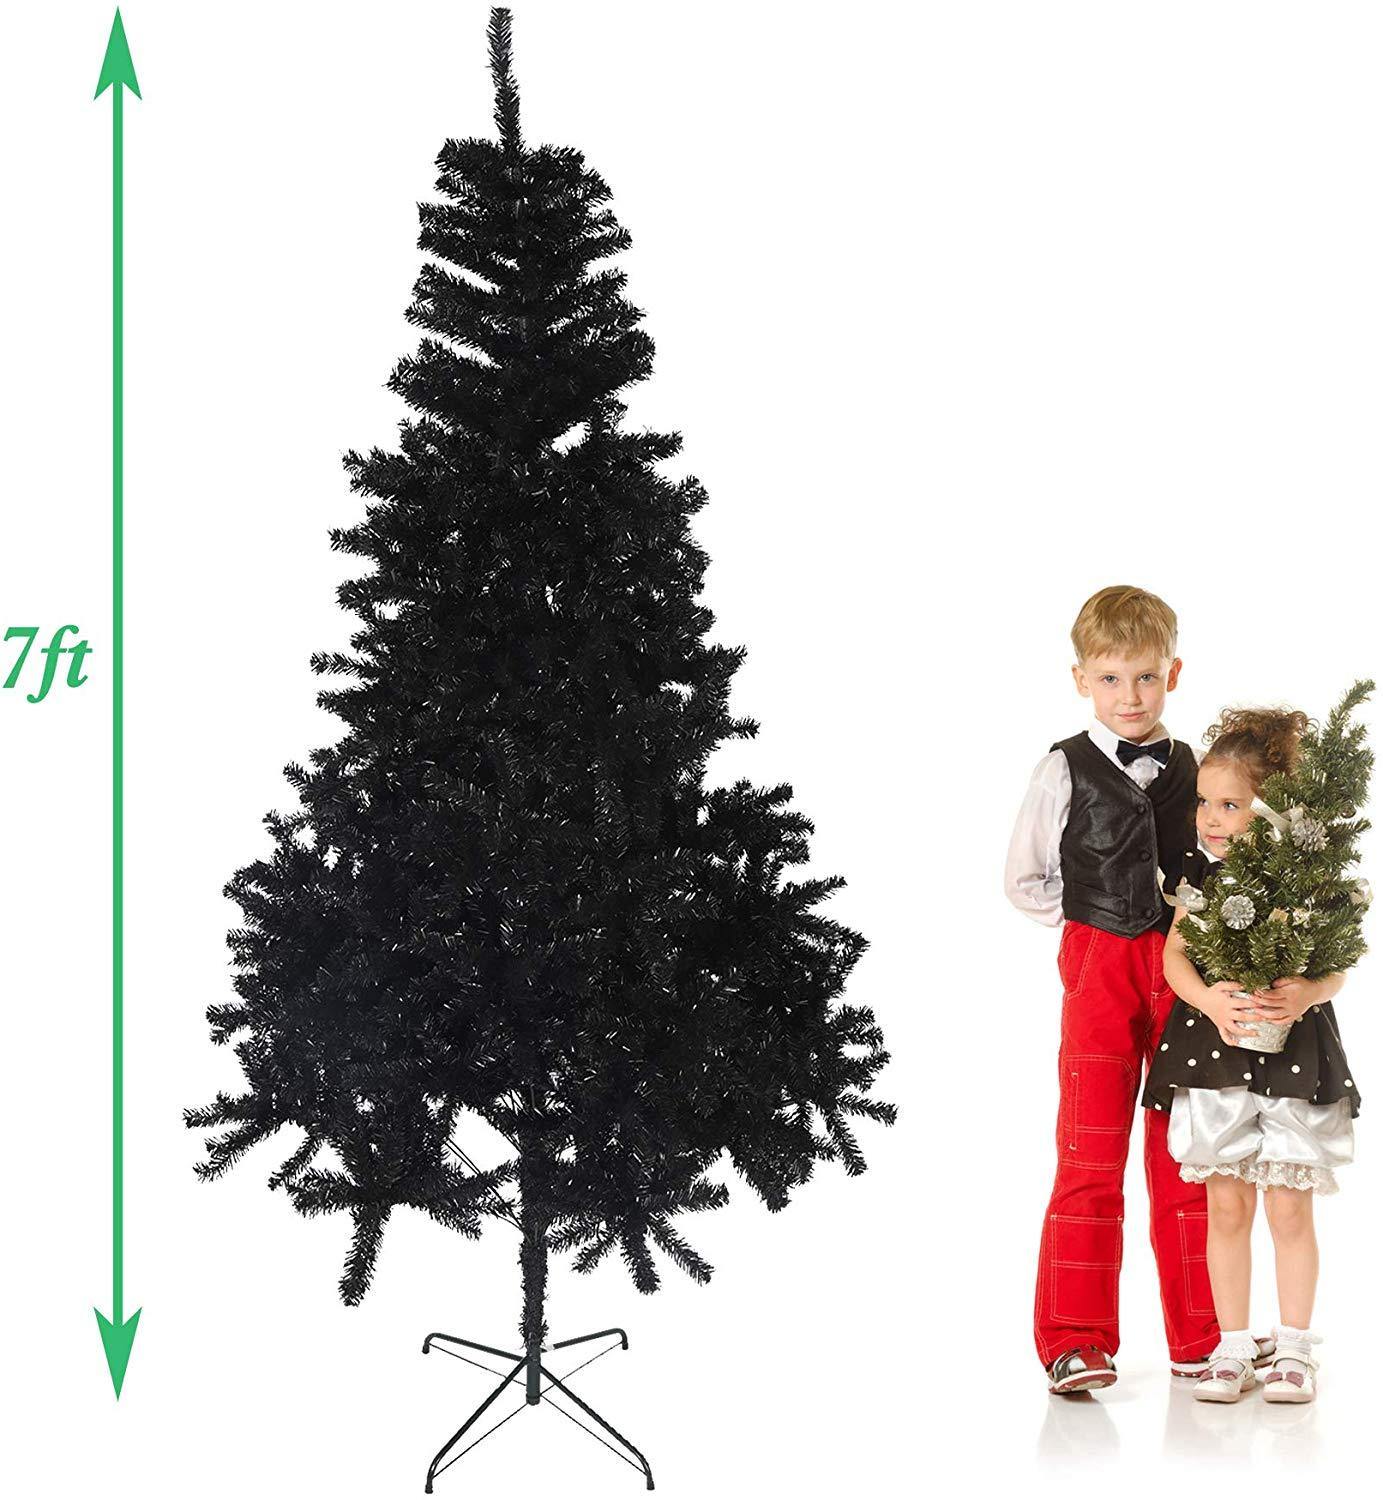 Bosonshop 7' Premium Artificial Christmas Tree with Solid Metal Stand, Festive Indoor and Outdoor Decoration, Black